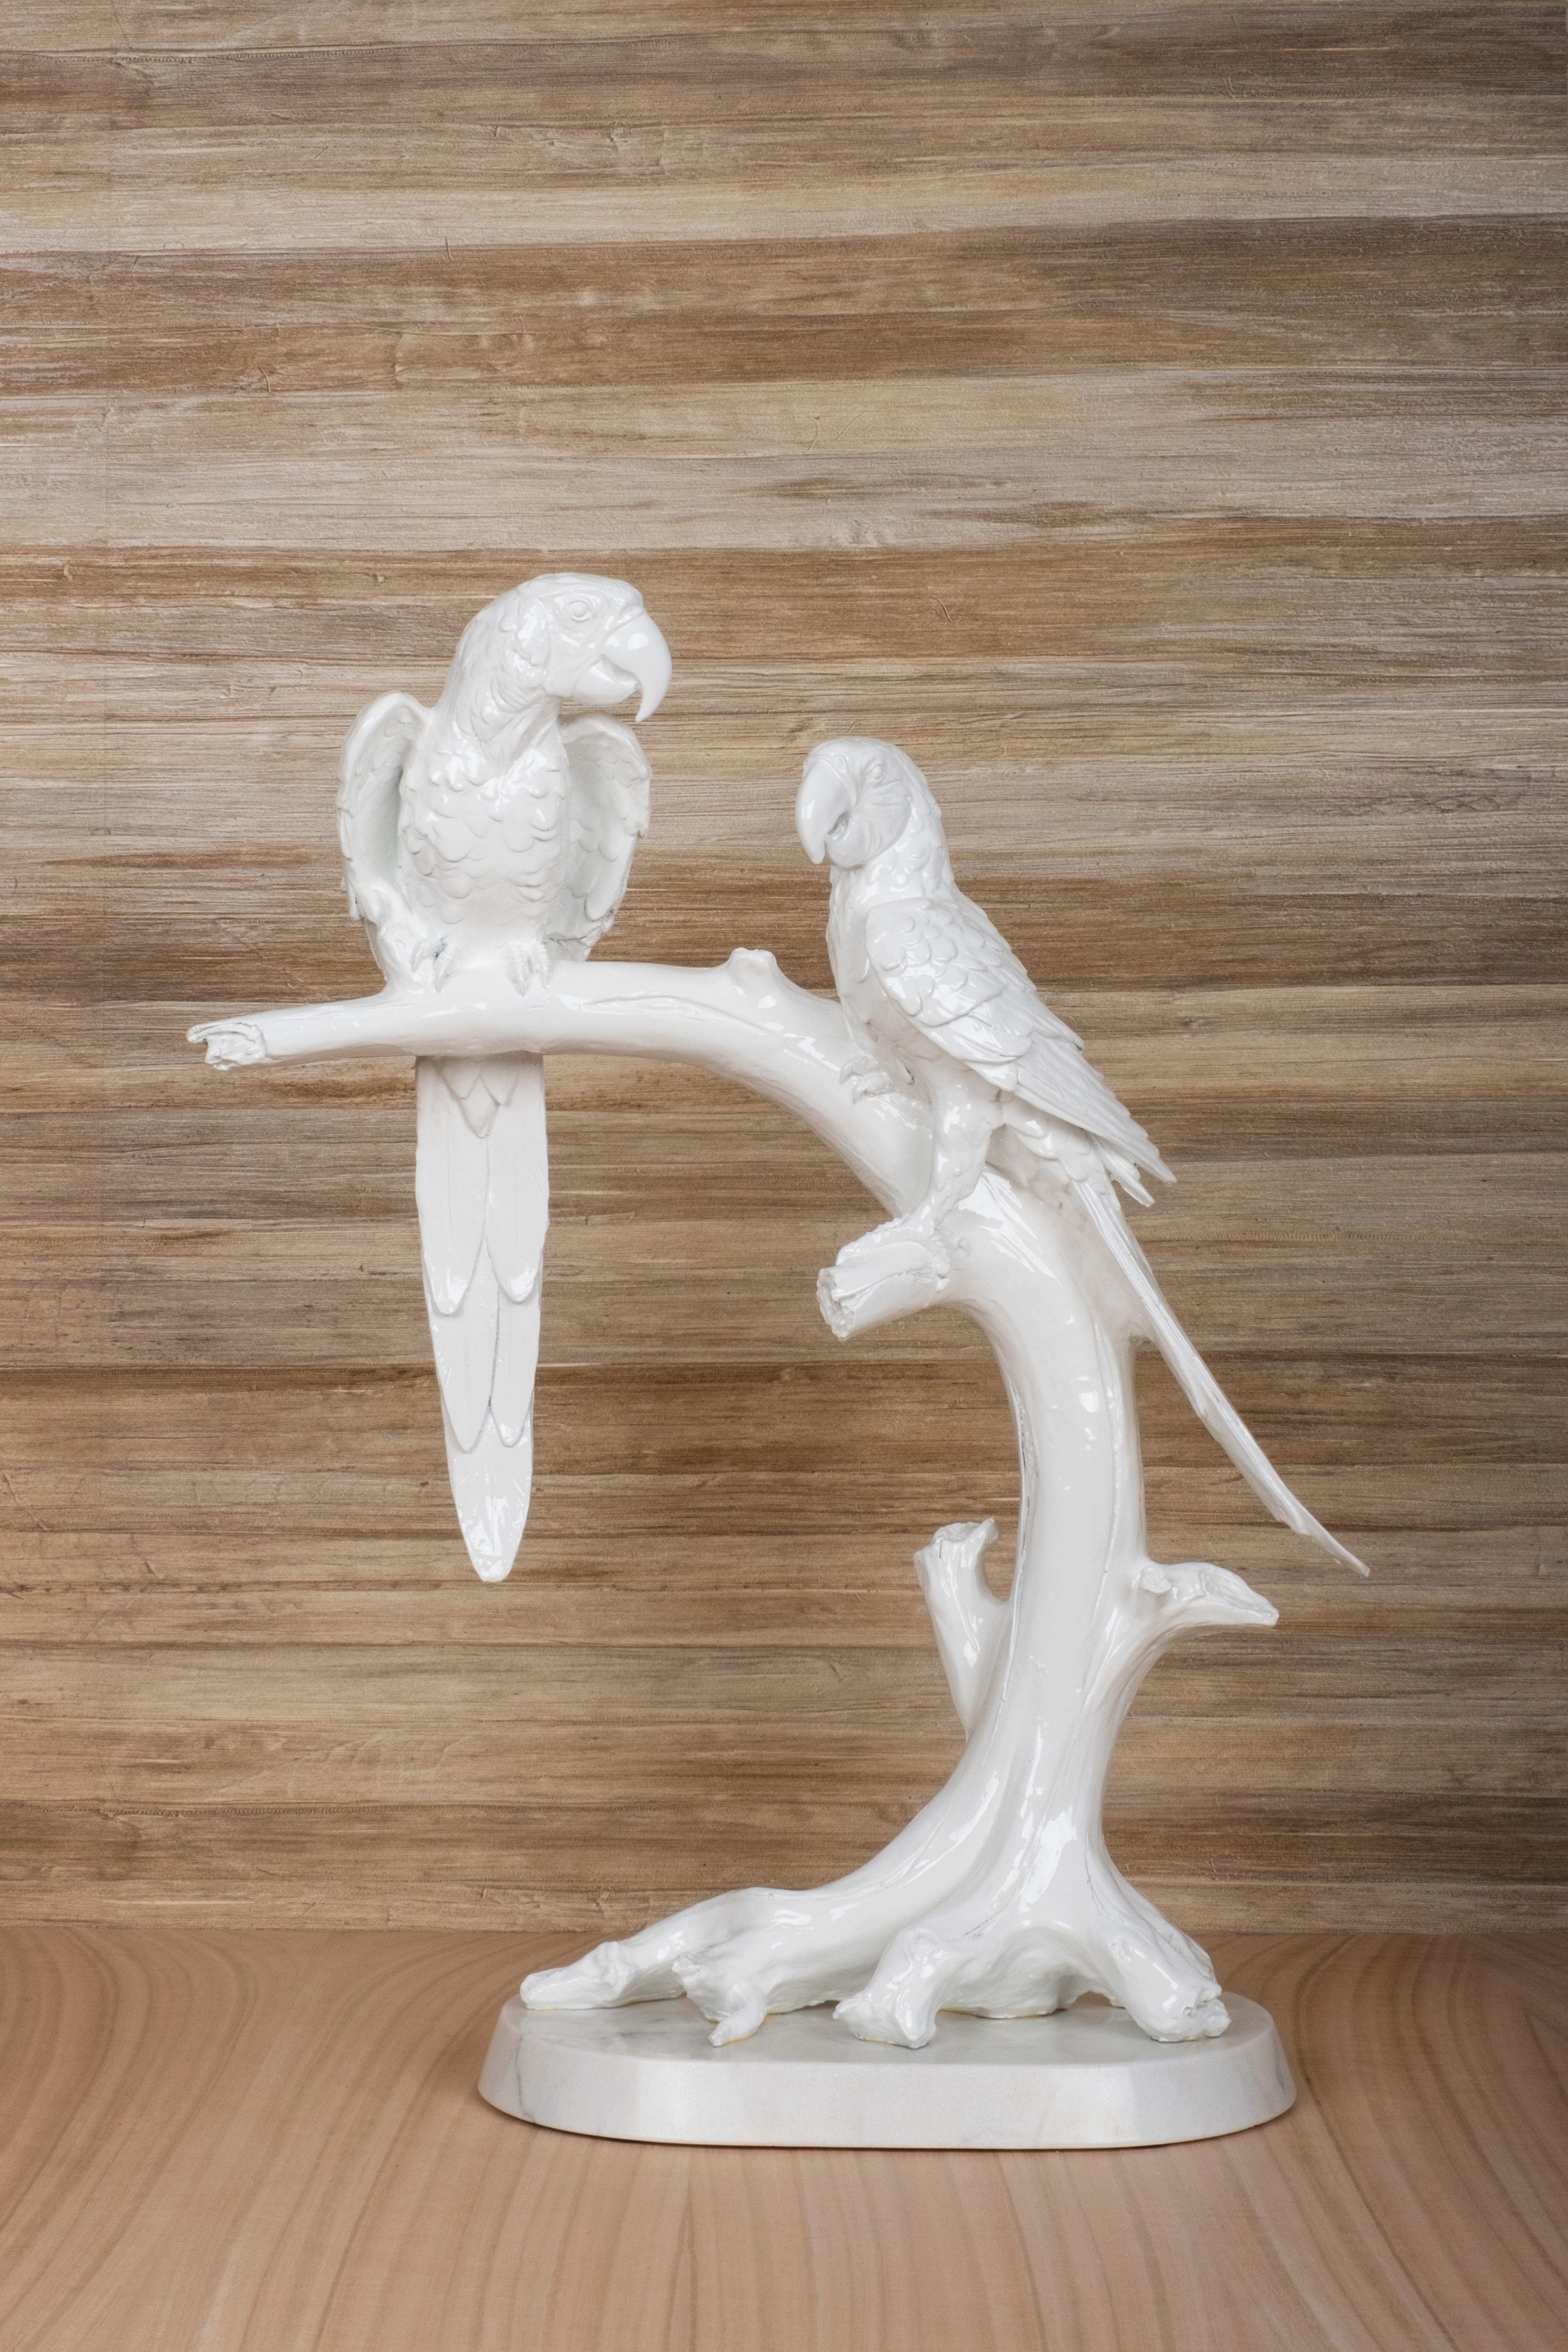 Modern Resin Statue, Parrots On Branch, Calacatta Base, Handmade by Lusitanus Home For Sale